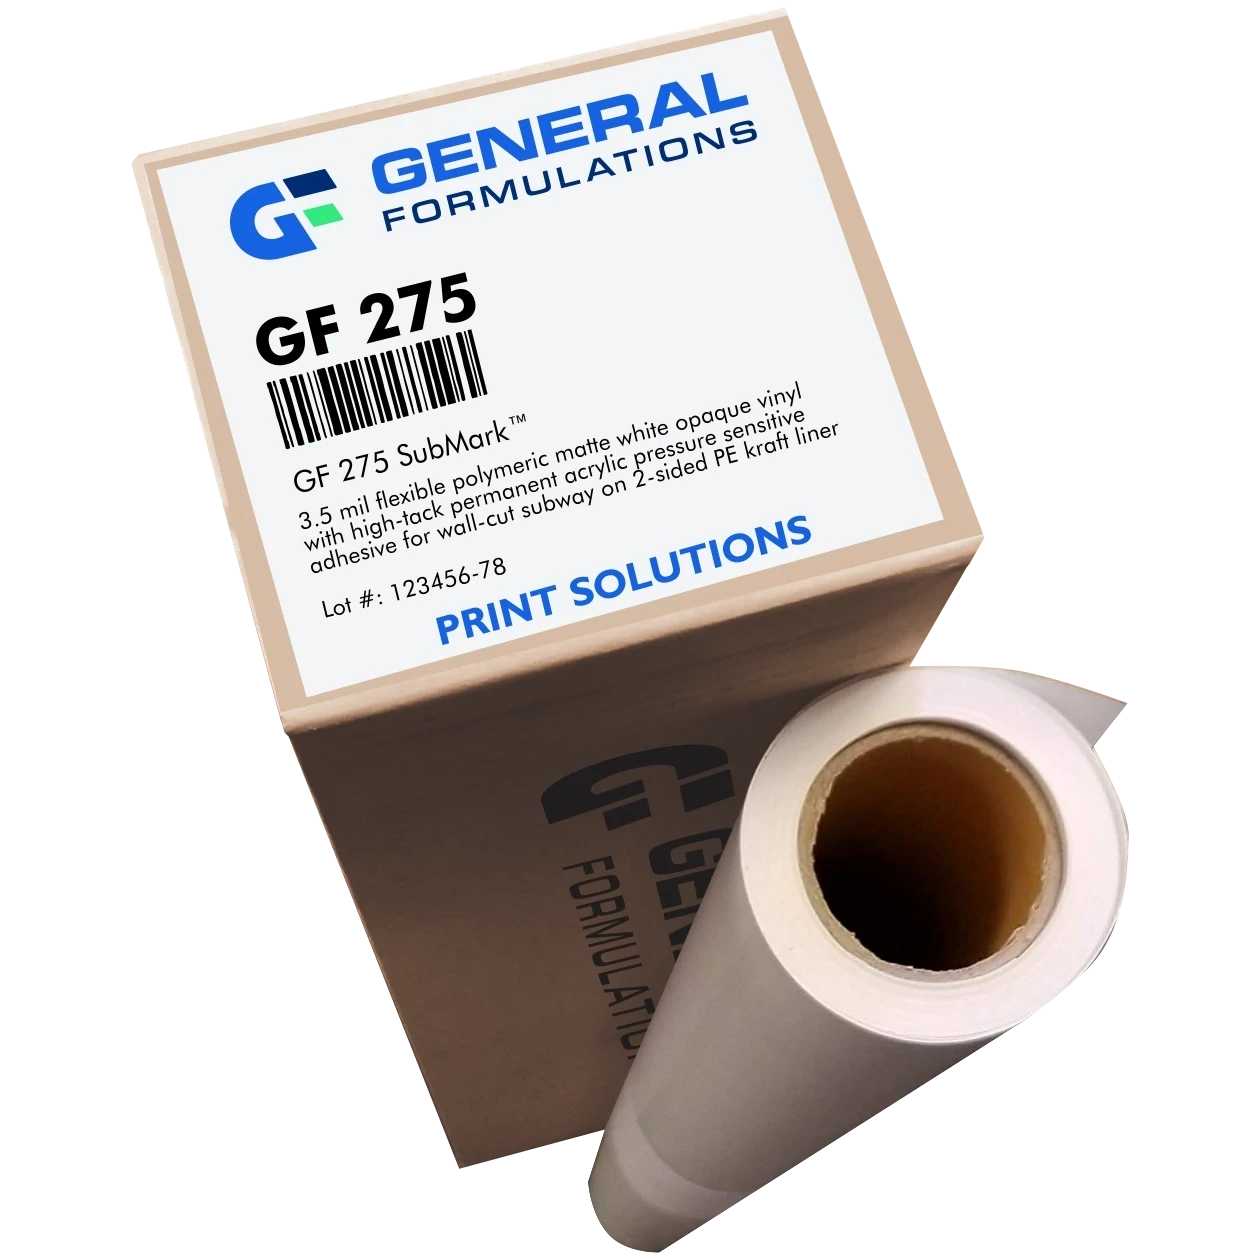 General Formulations 275 SubMark™ Matte White Opaque
Vinyl - High-Tack Permanent, Select Size: 54" x 150'